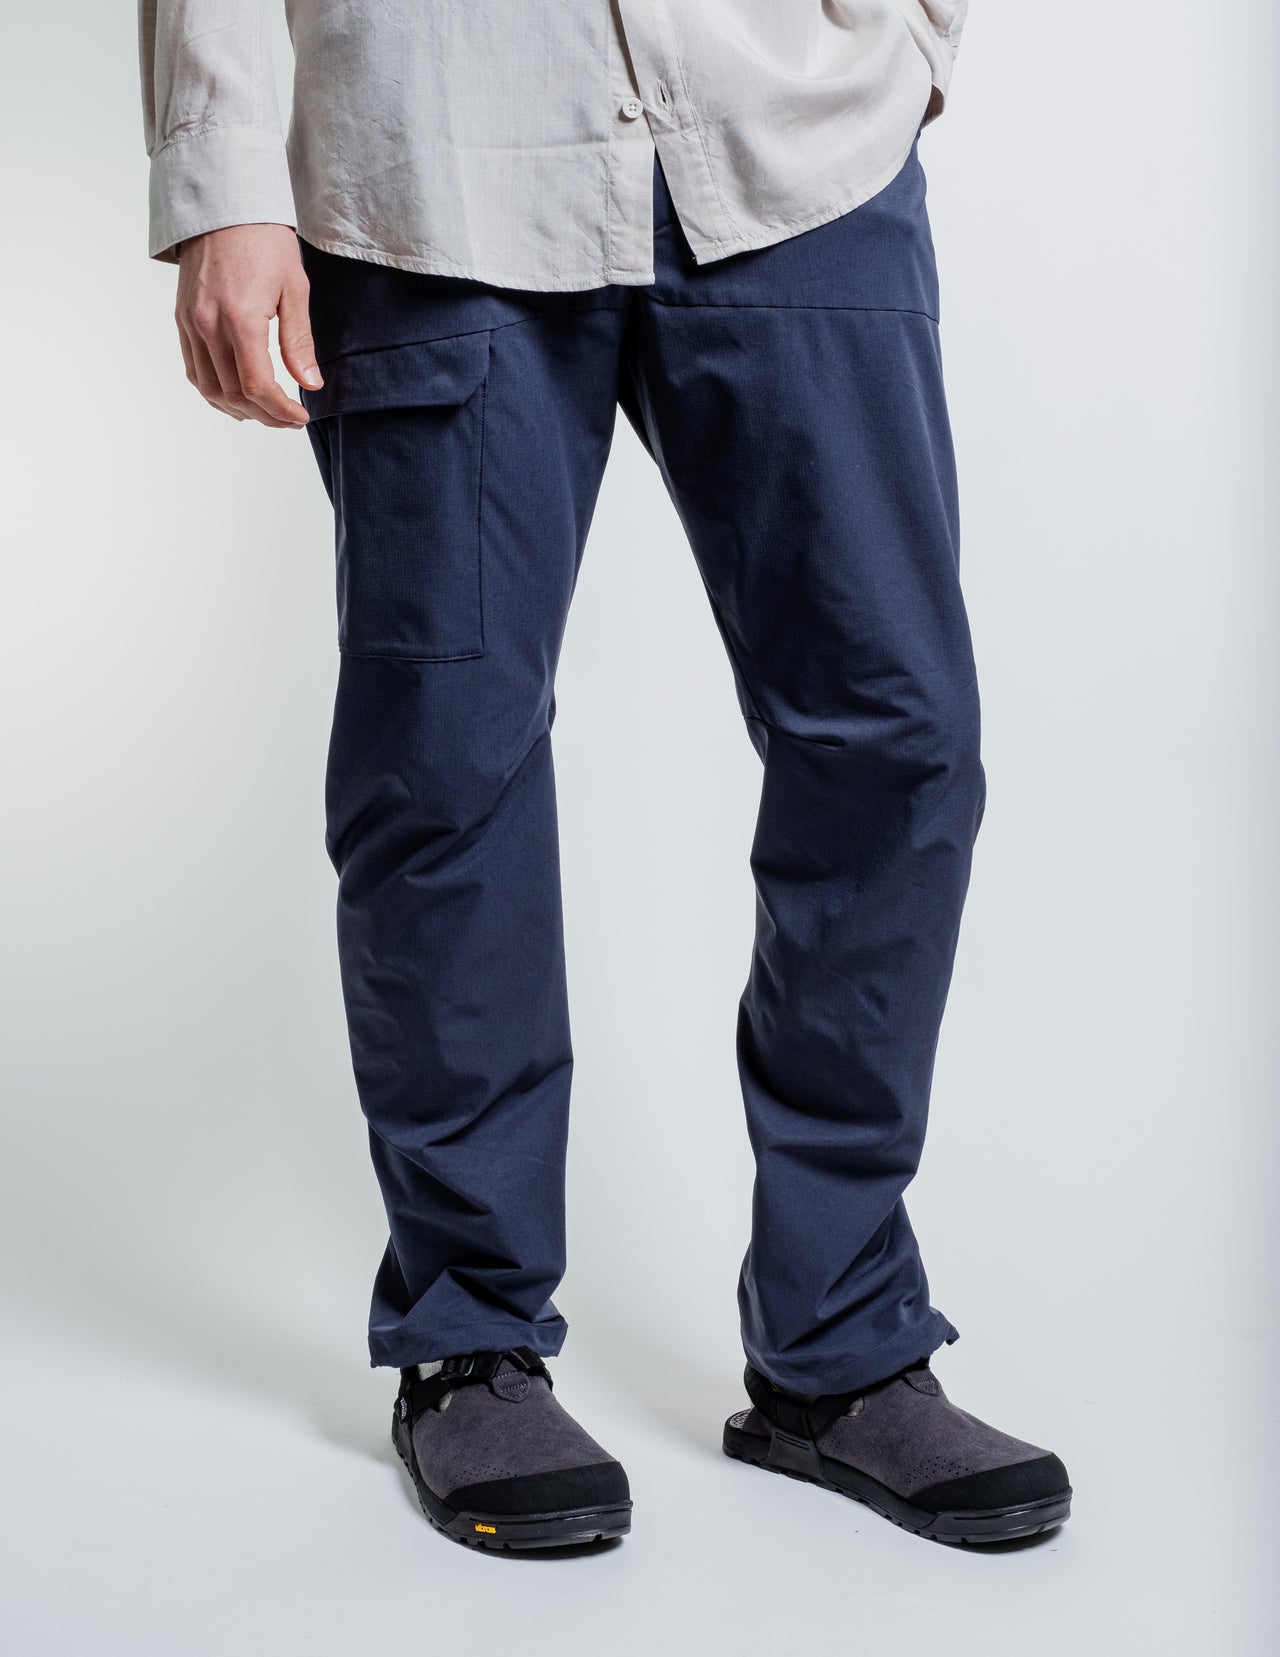 Go Pants in Blue Illusion